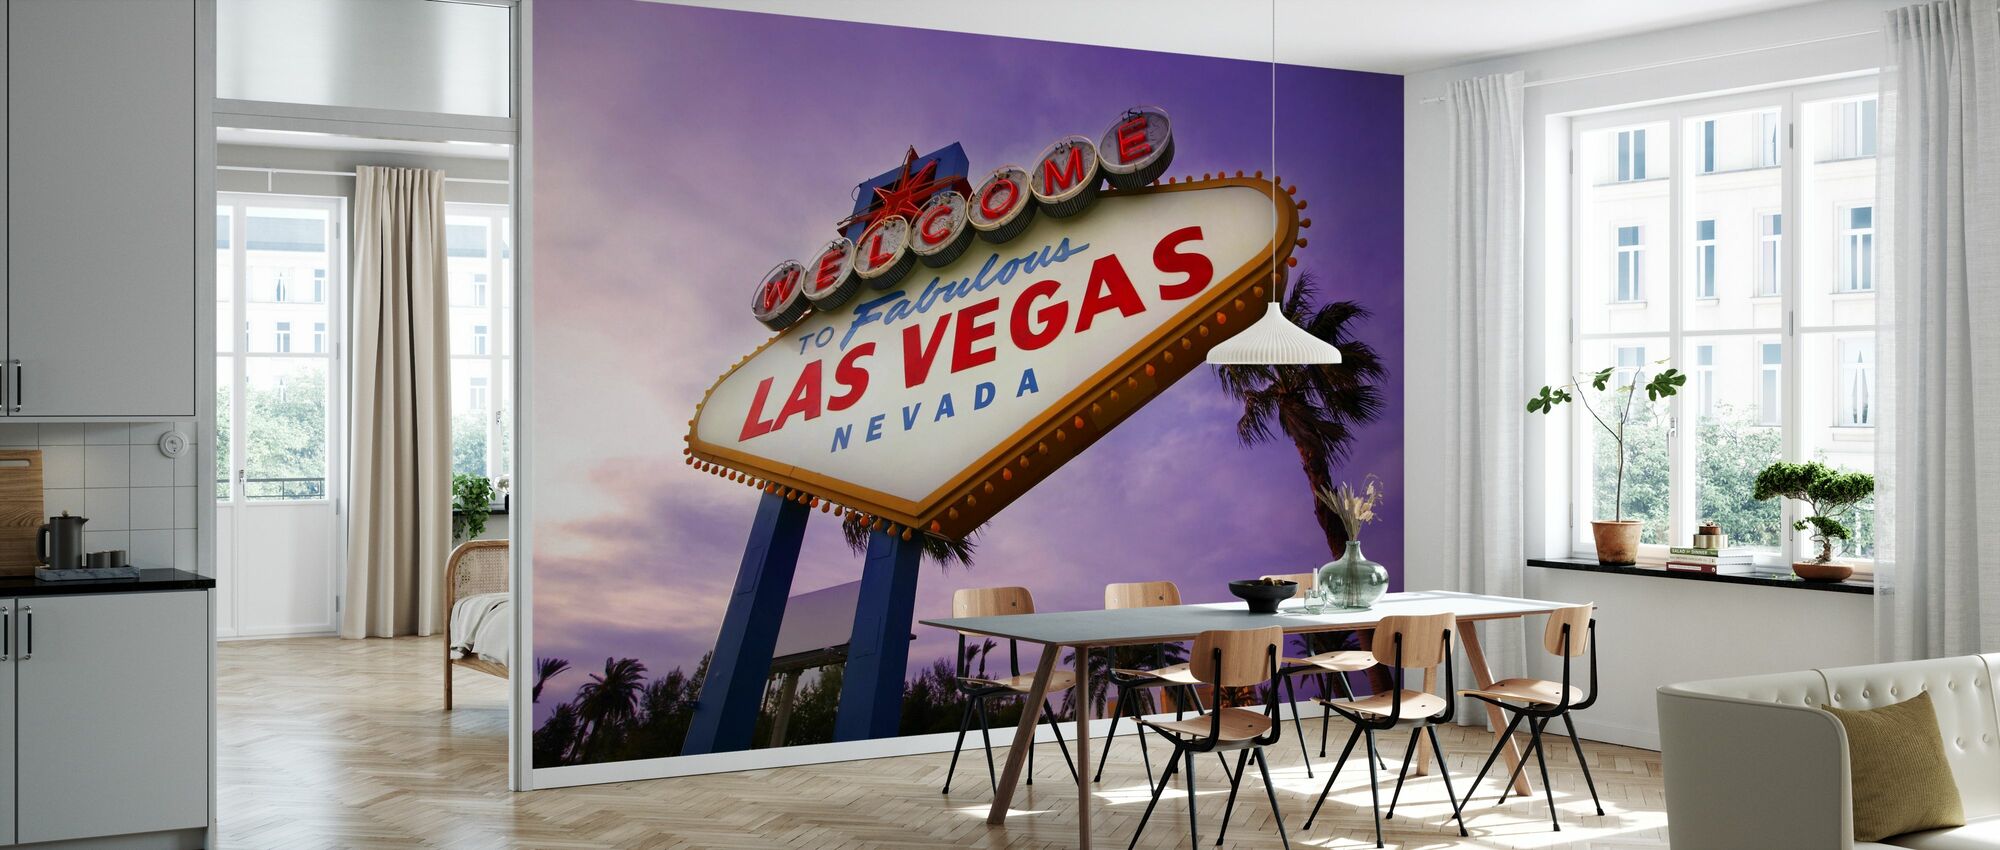 Famous to Las Vegas Sign  Photo Wallpaper Wall Mural DECOR Paper Poster 